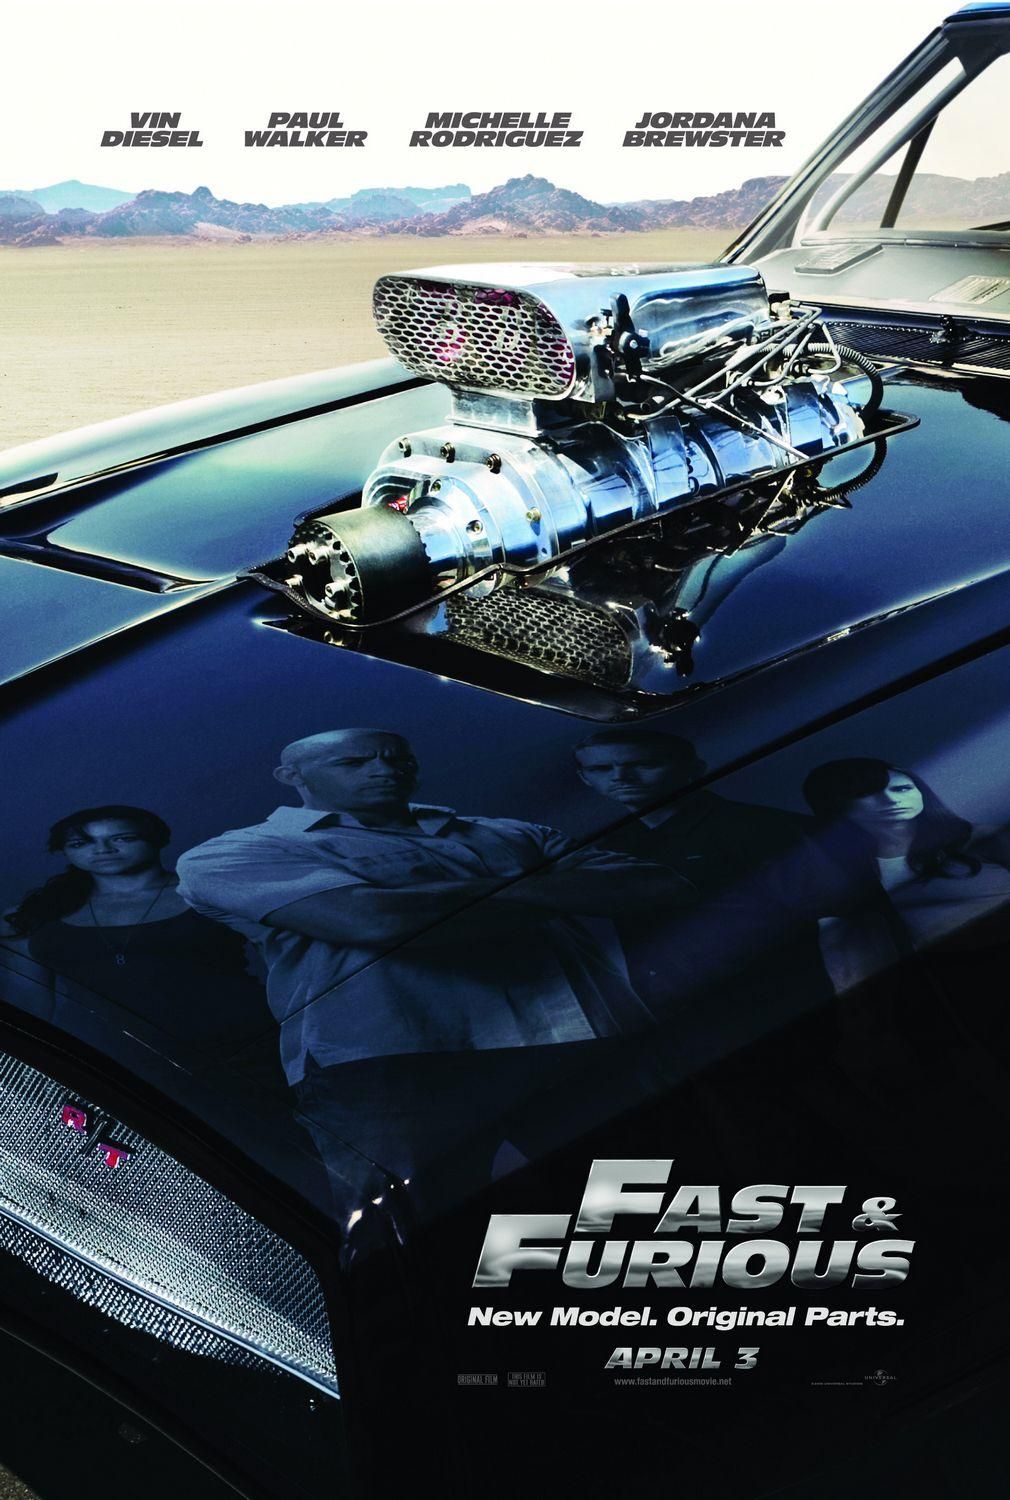 Fast and Furious Film Poster